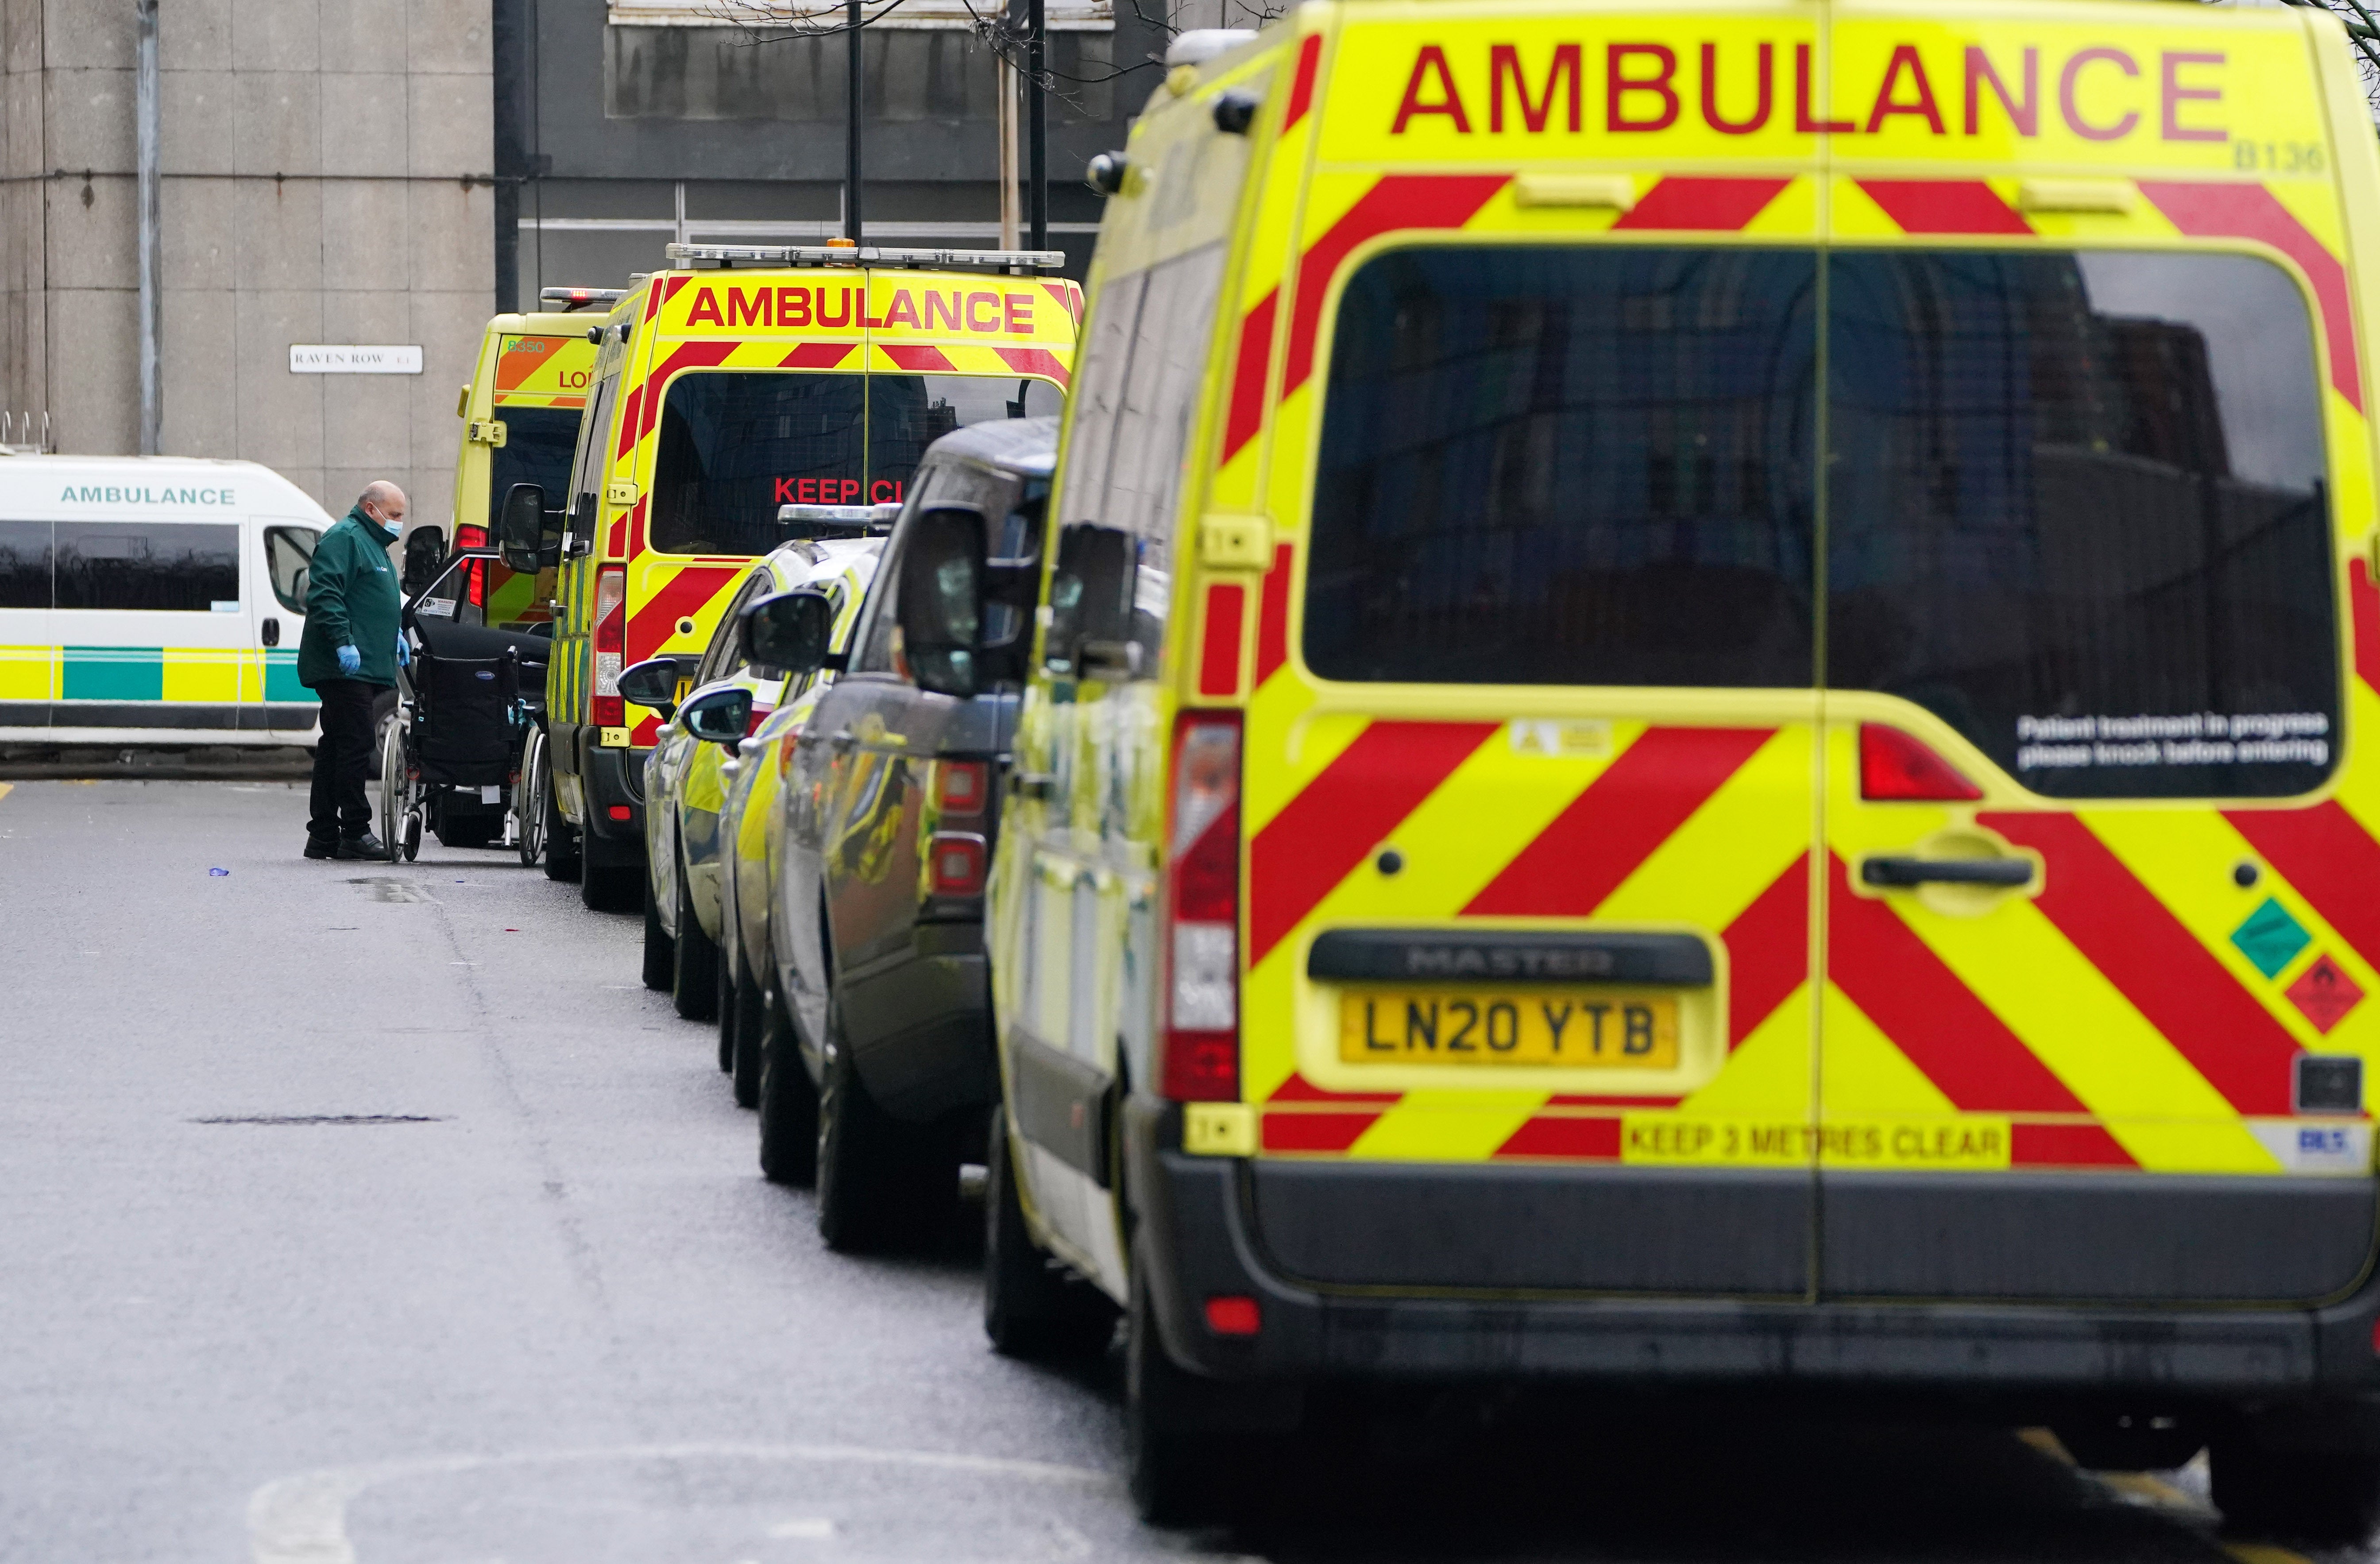 West Midlands Ambulance Service predicted it would lose 48,000 ambulance hours waiting outside A&E departments in July